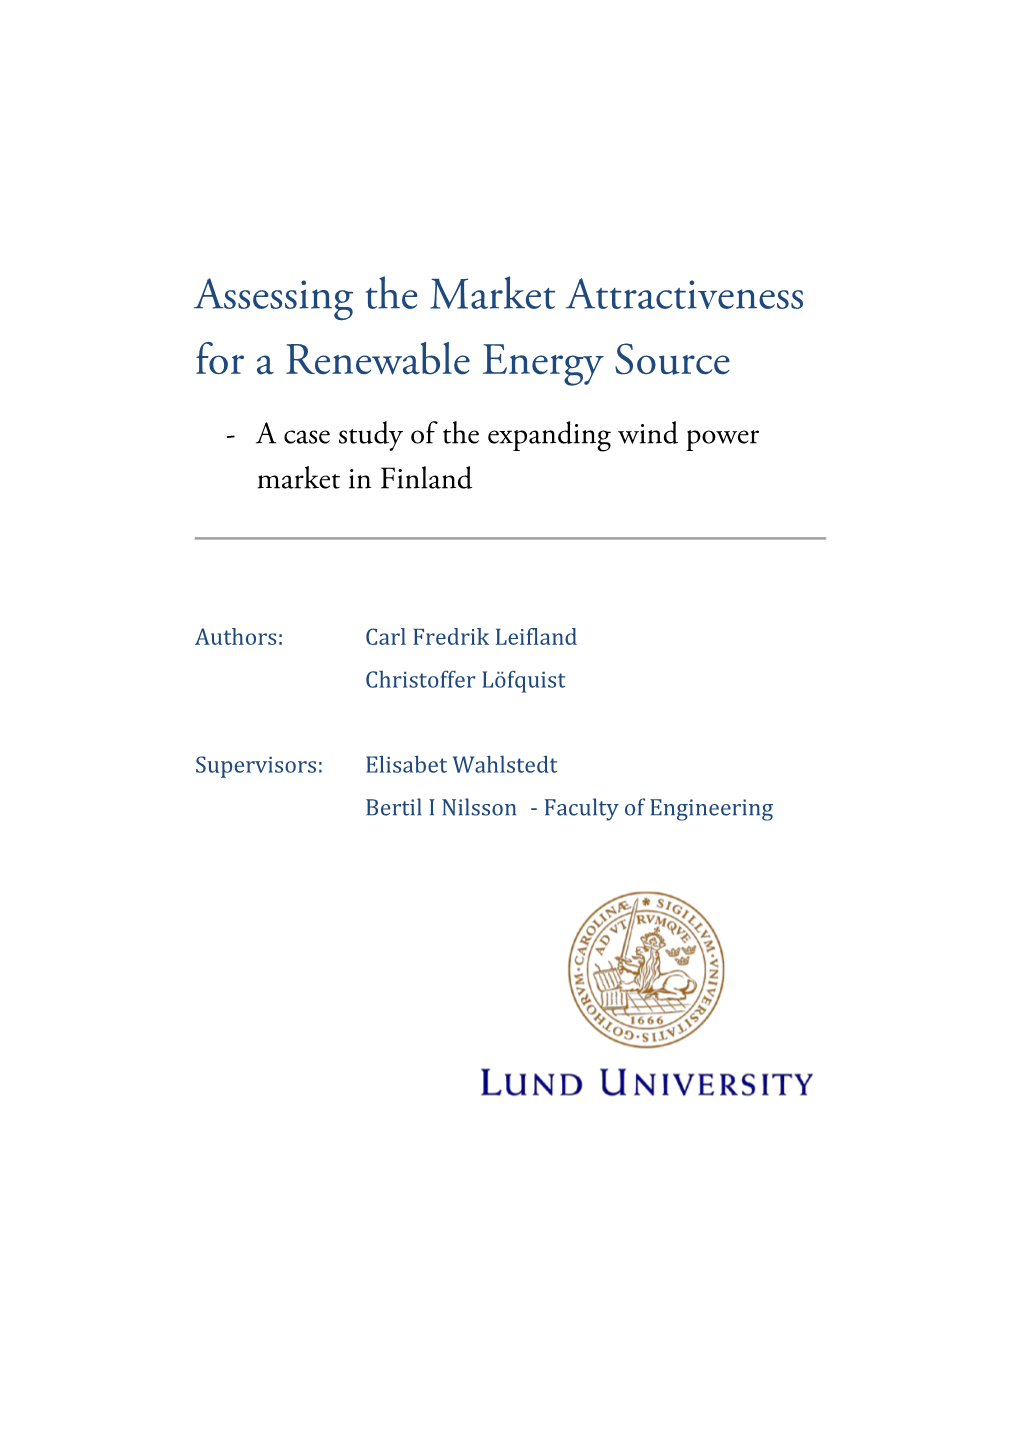 Assessing the Market Attractiveness for a Renewable Energy Source